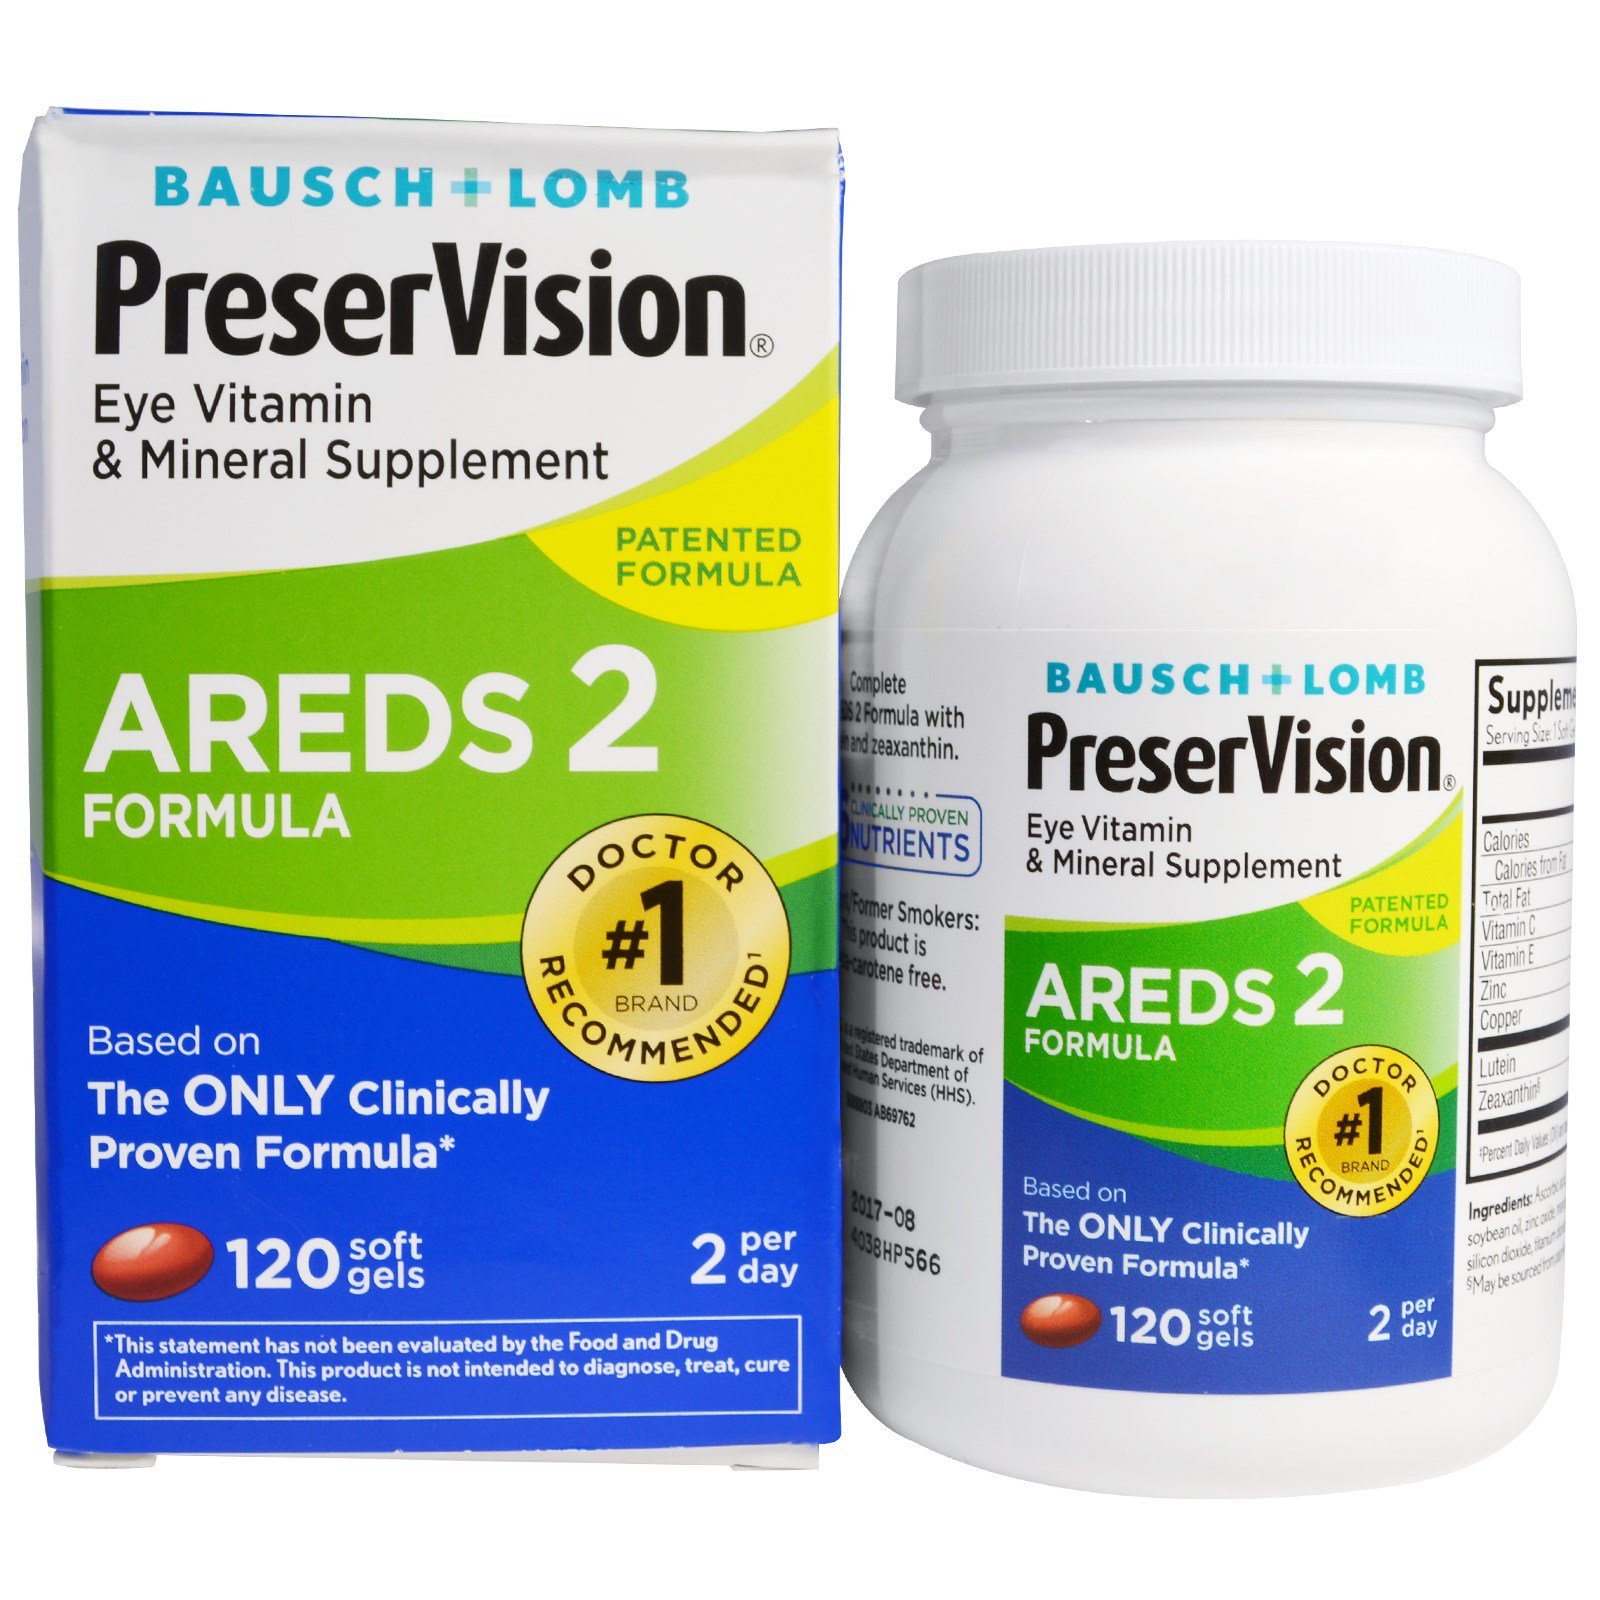 Bausch Lomb PreserVision AREDS Formula Eye Vitamin Mineral Supplement Soft Gels